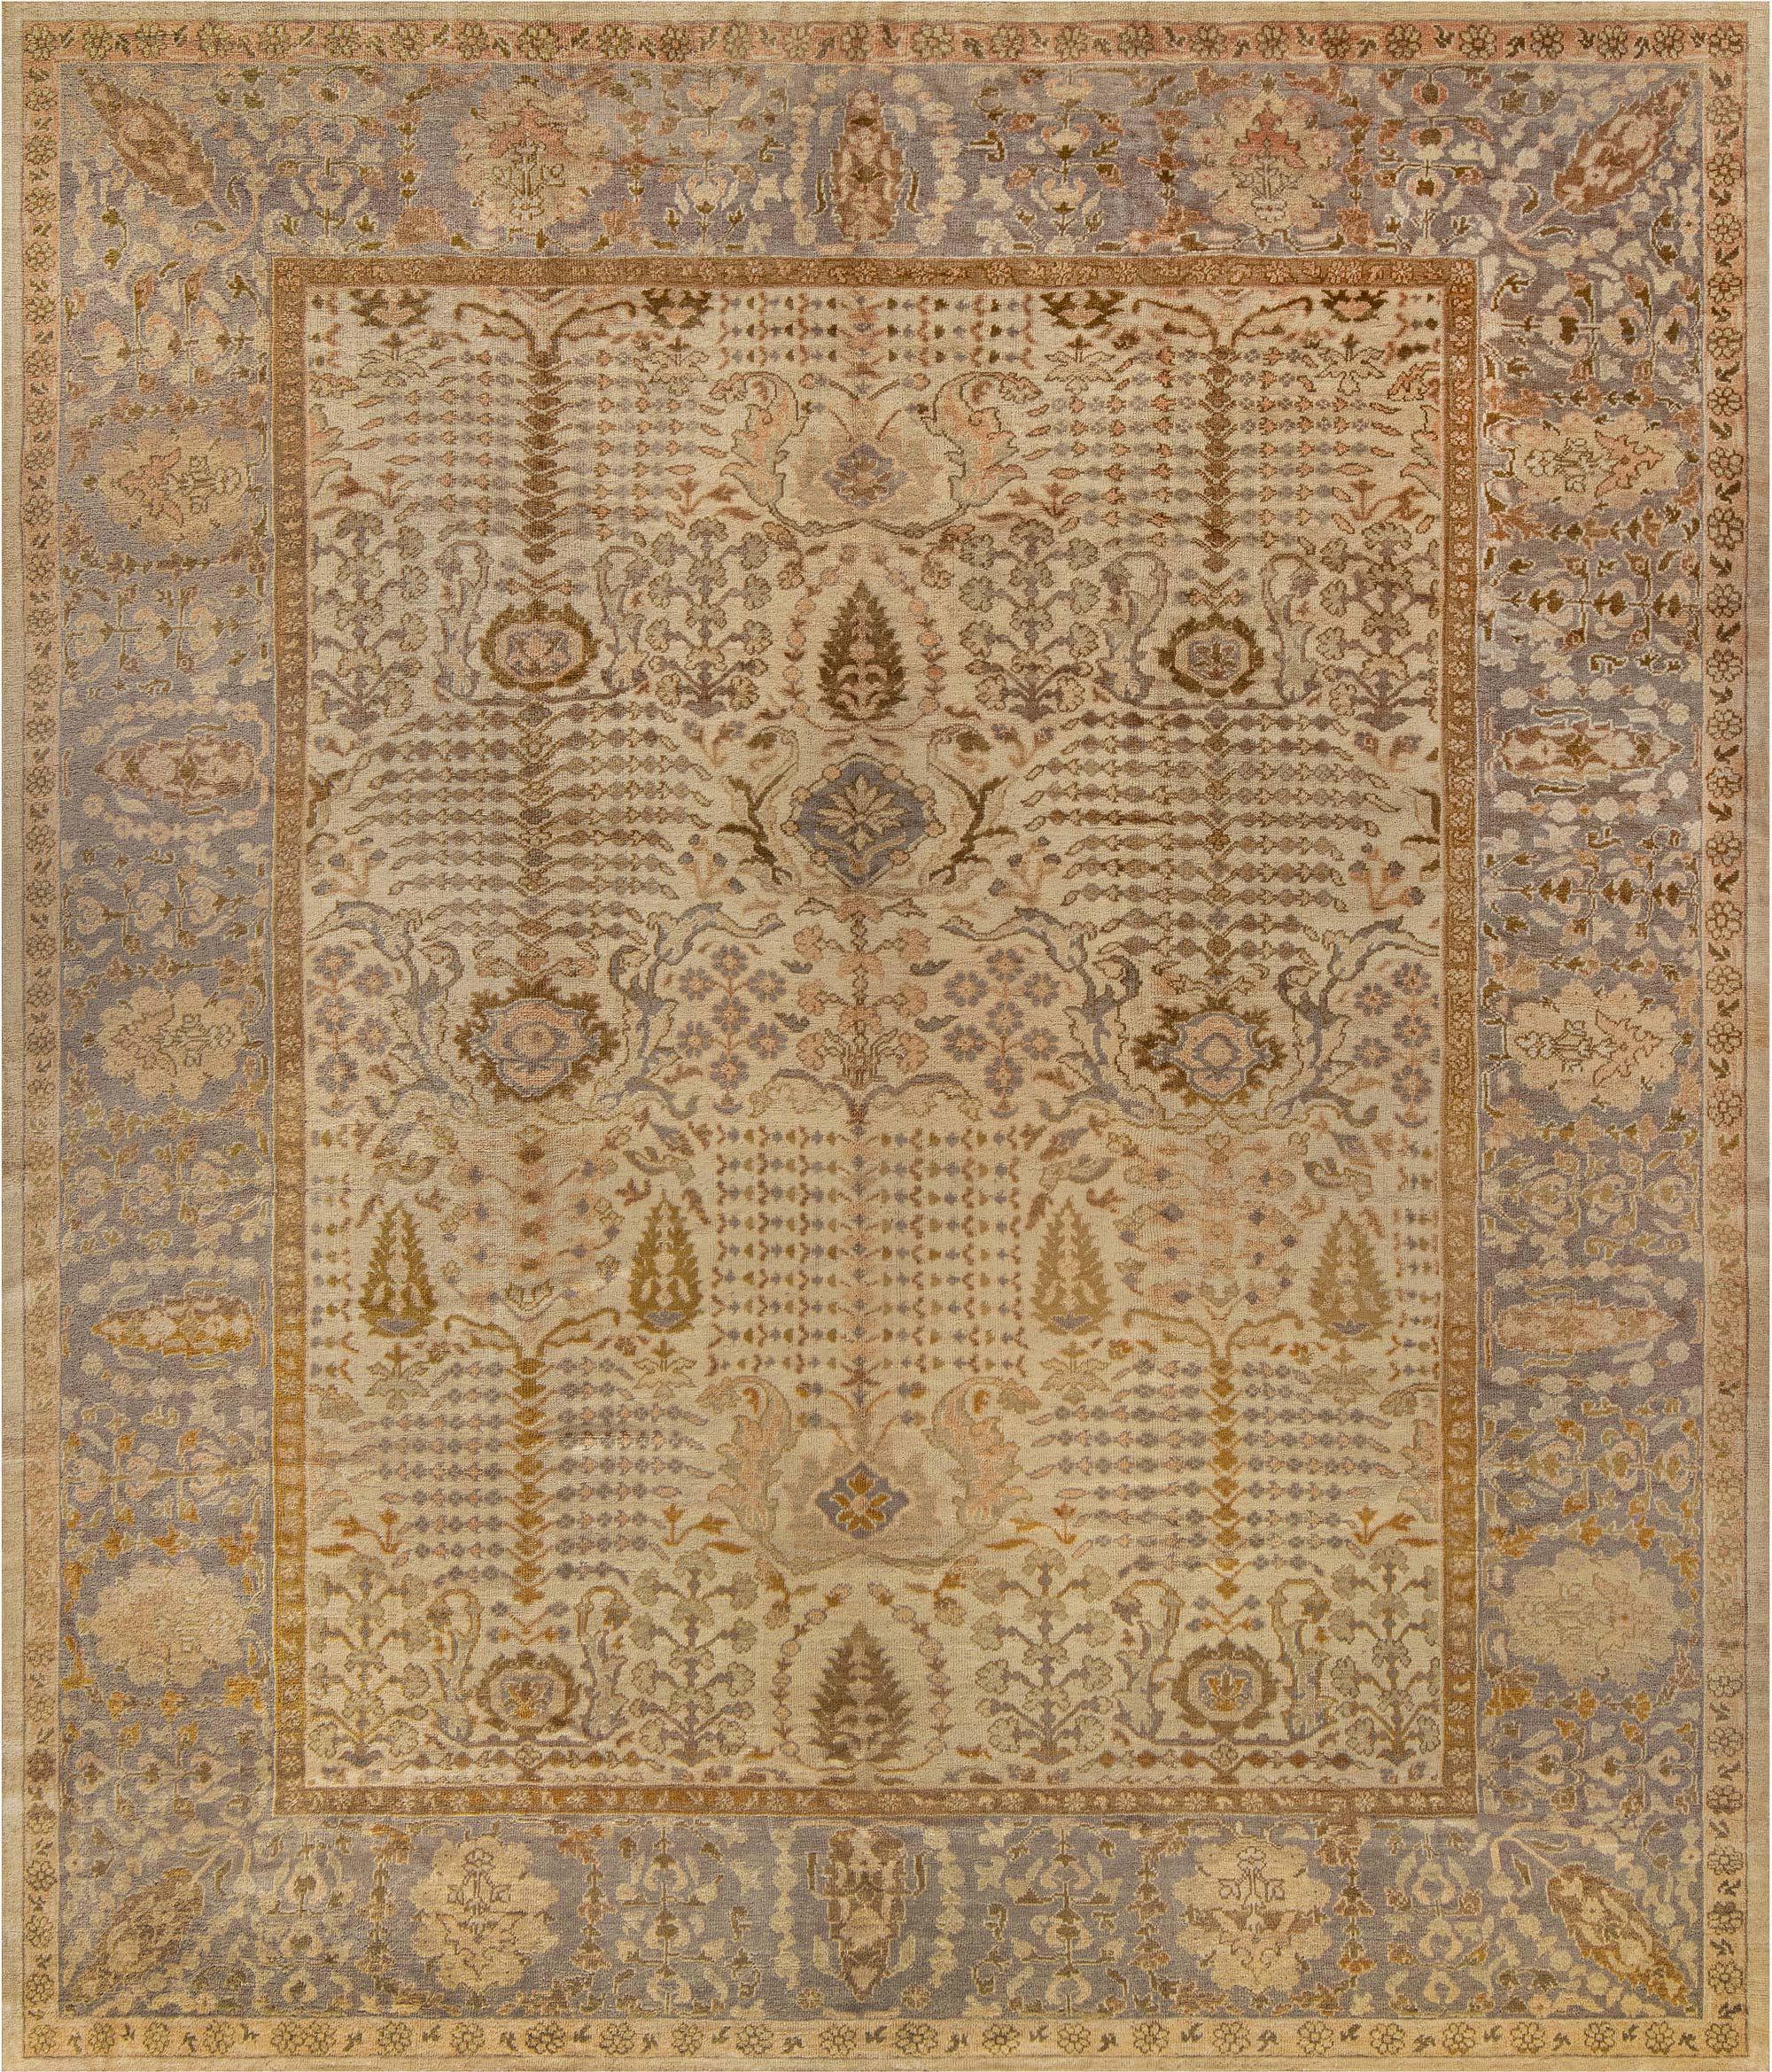 Early 20th Century Persian Sultanabad Wool Rug